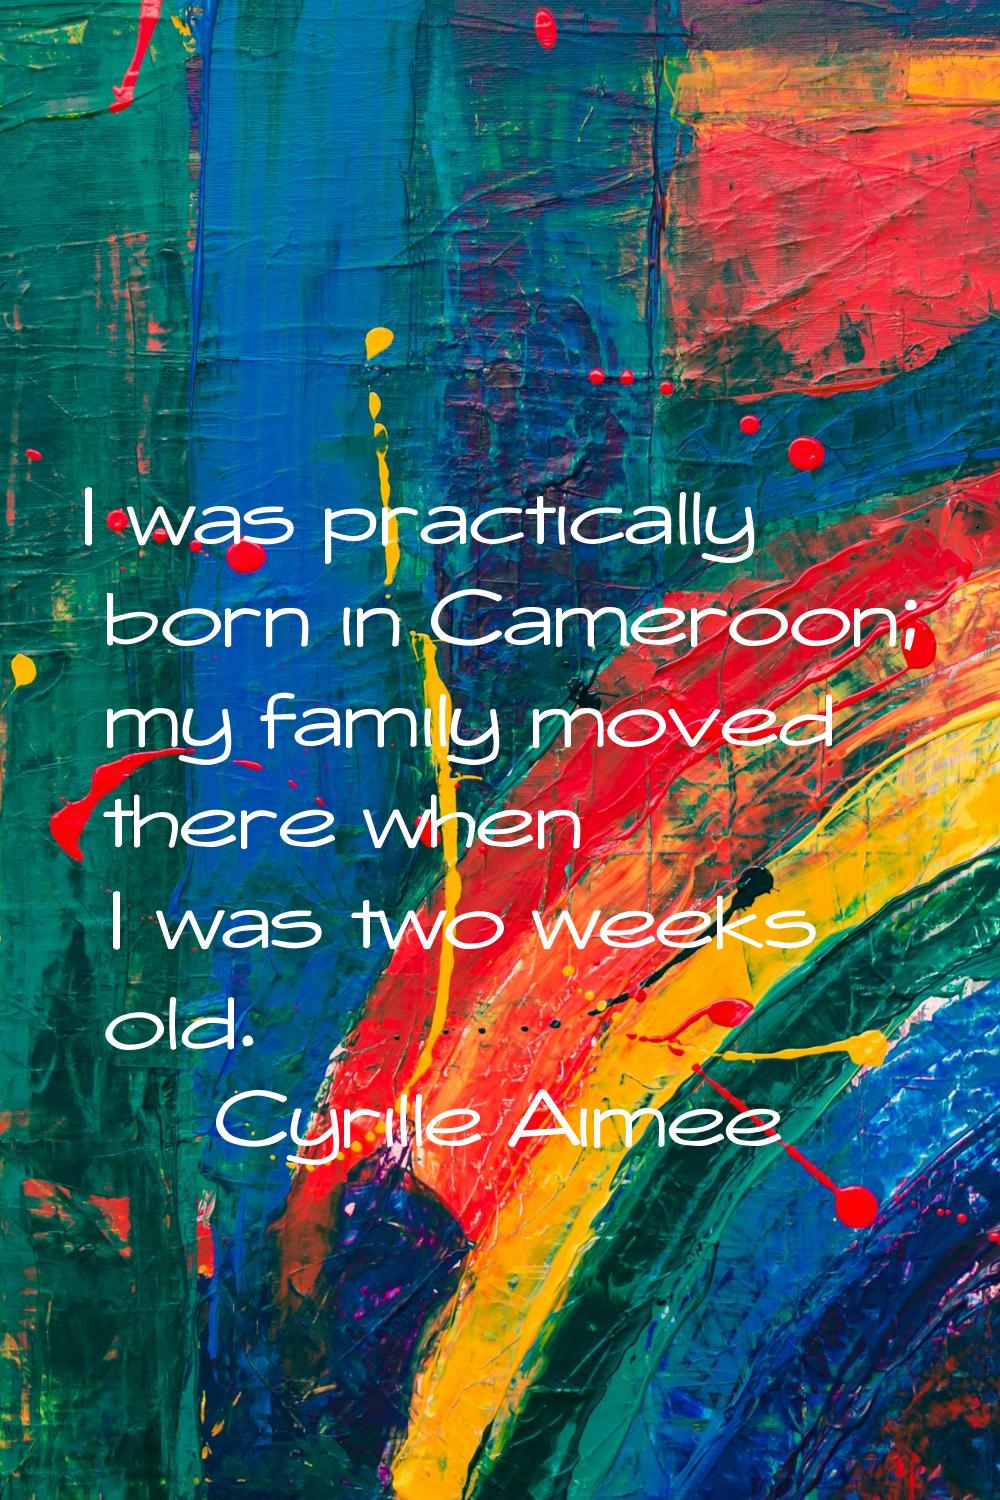 I was practically born in Cameroon; my family moved there when I was two weeks old.